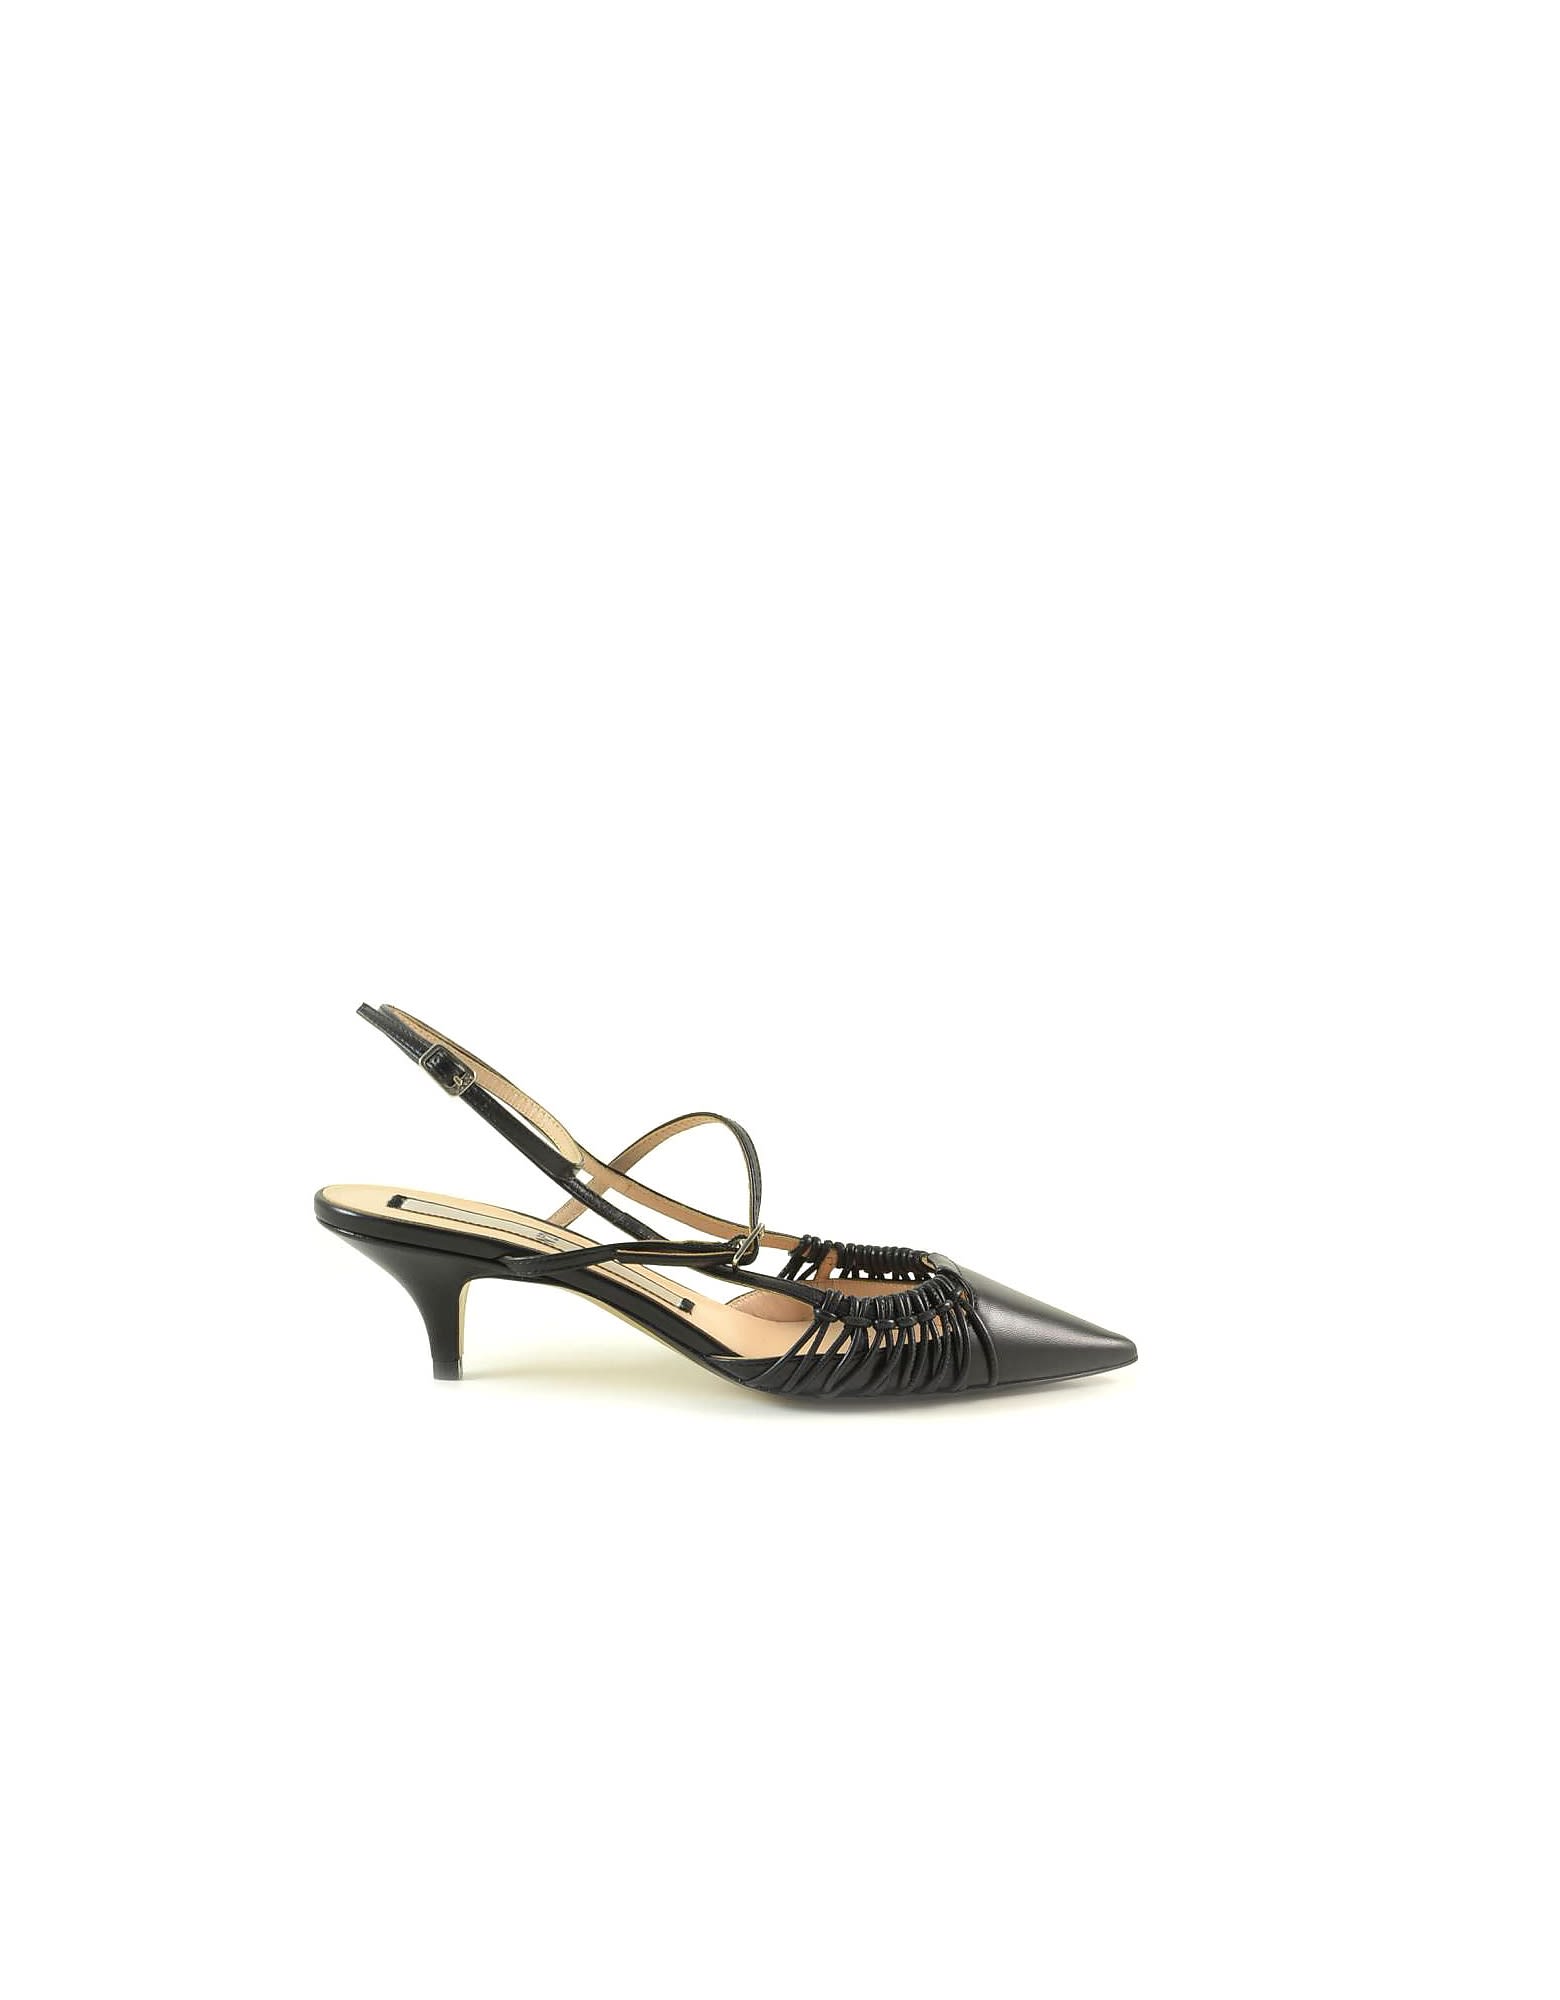 Buy N.21 N?1 Black Leather Mid-heel Slingback Shoes online, shop N.21 shoes with free shipping